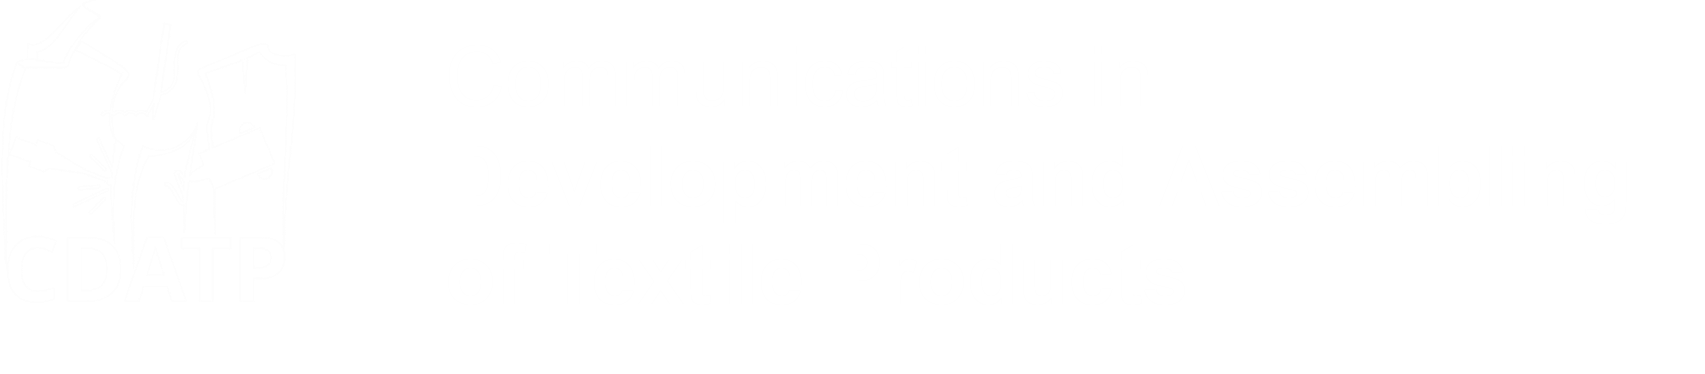 Communications in Development and Assembling  of Textile Products